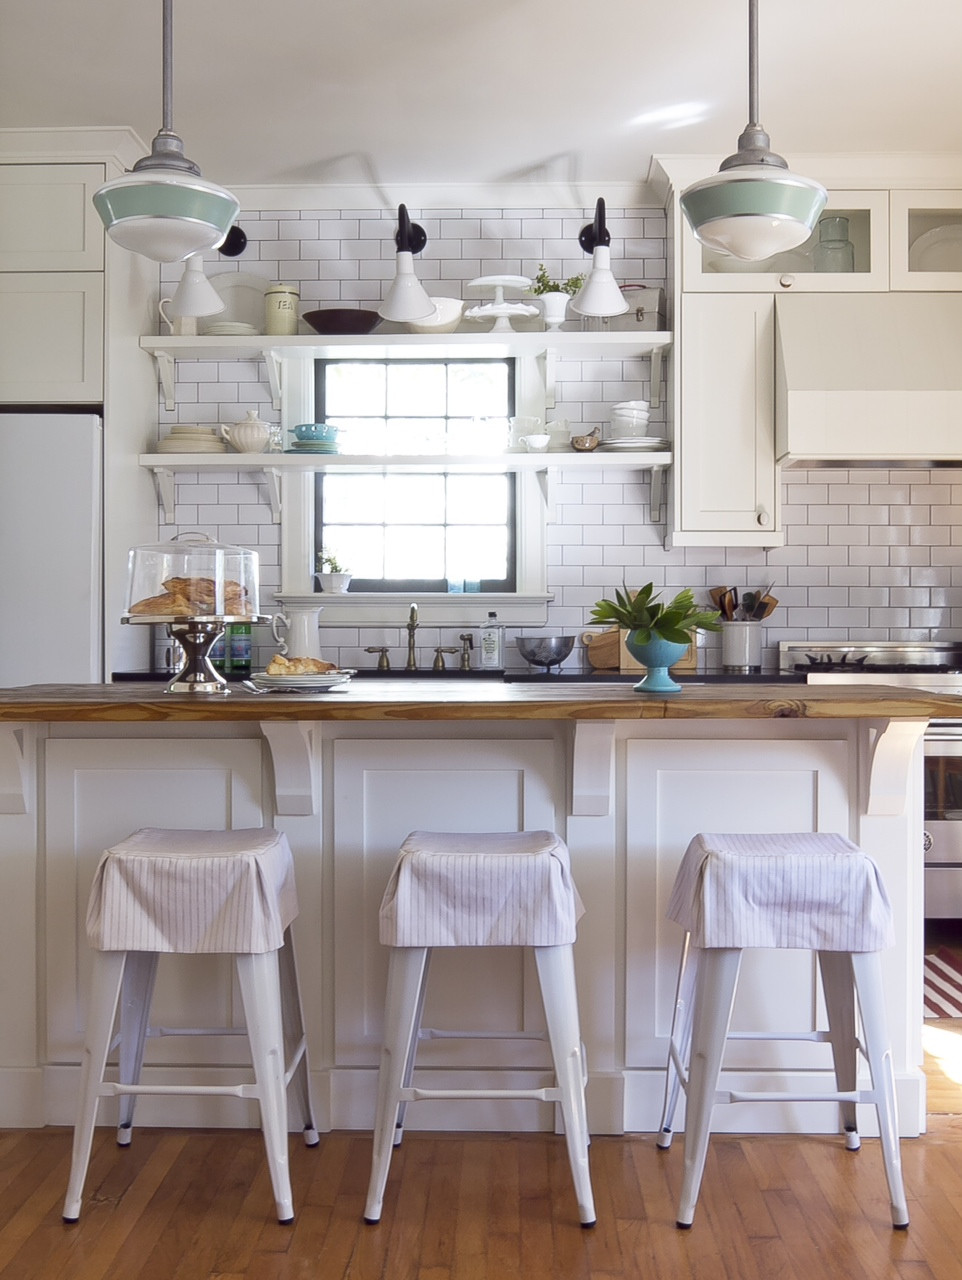 1950'S Kitchen Light Fixtures
 Angle Shades a Risky Rewarding Choice for Decatur Kitchen